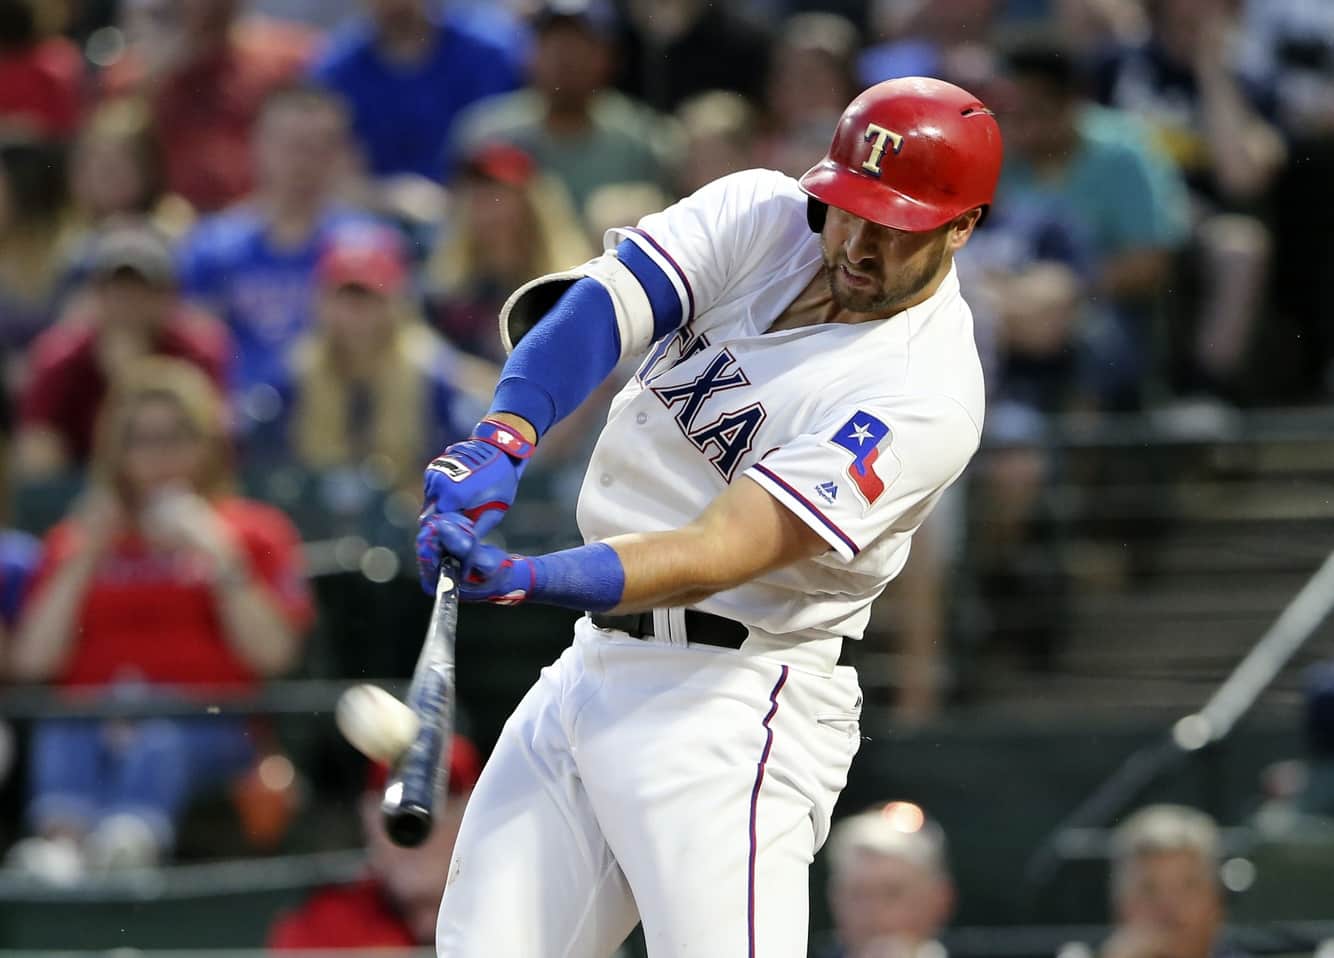 Joey Gallo of the Texas Rangers absolutely destroyed this pitch